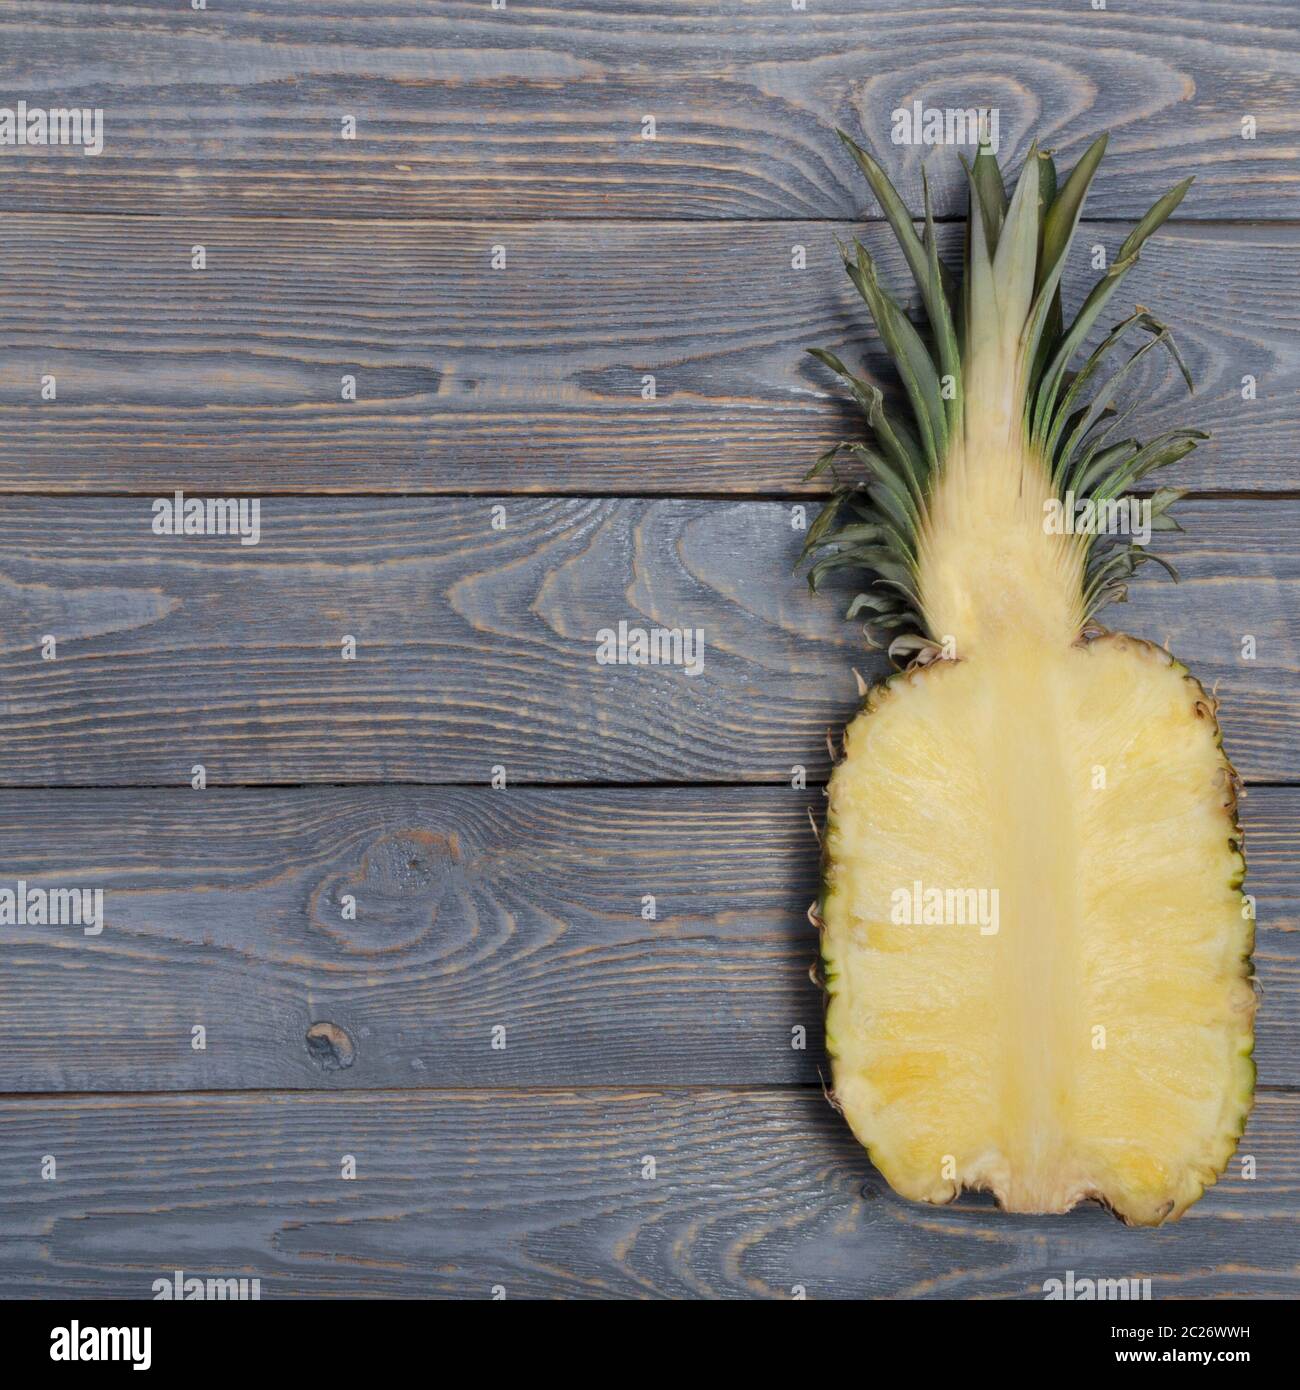 Flat lay of pineapple cut in half. White wooden table. Top view, overhead Stock Photo